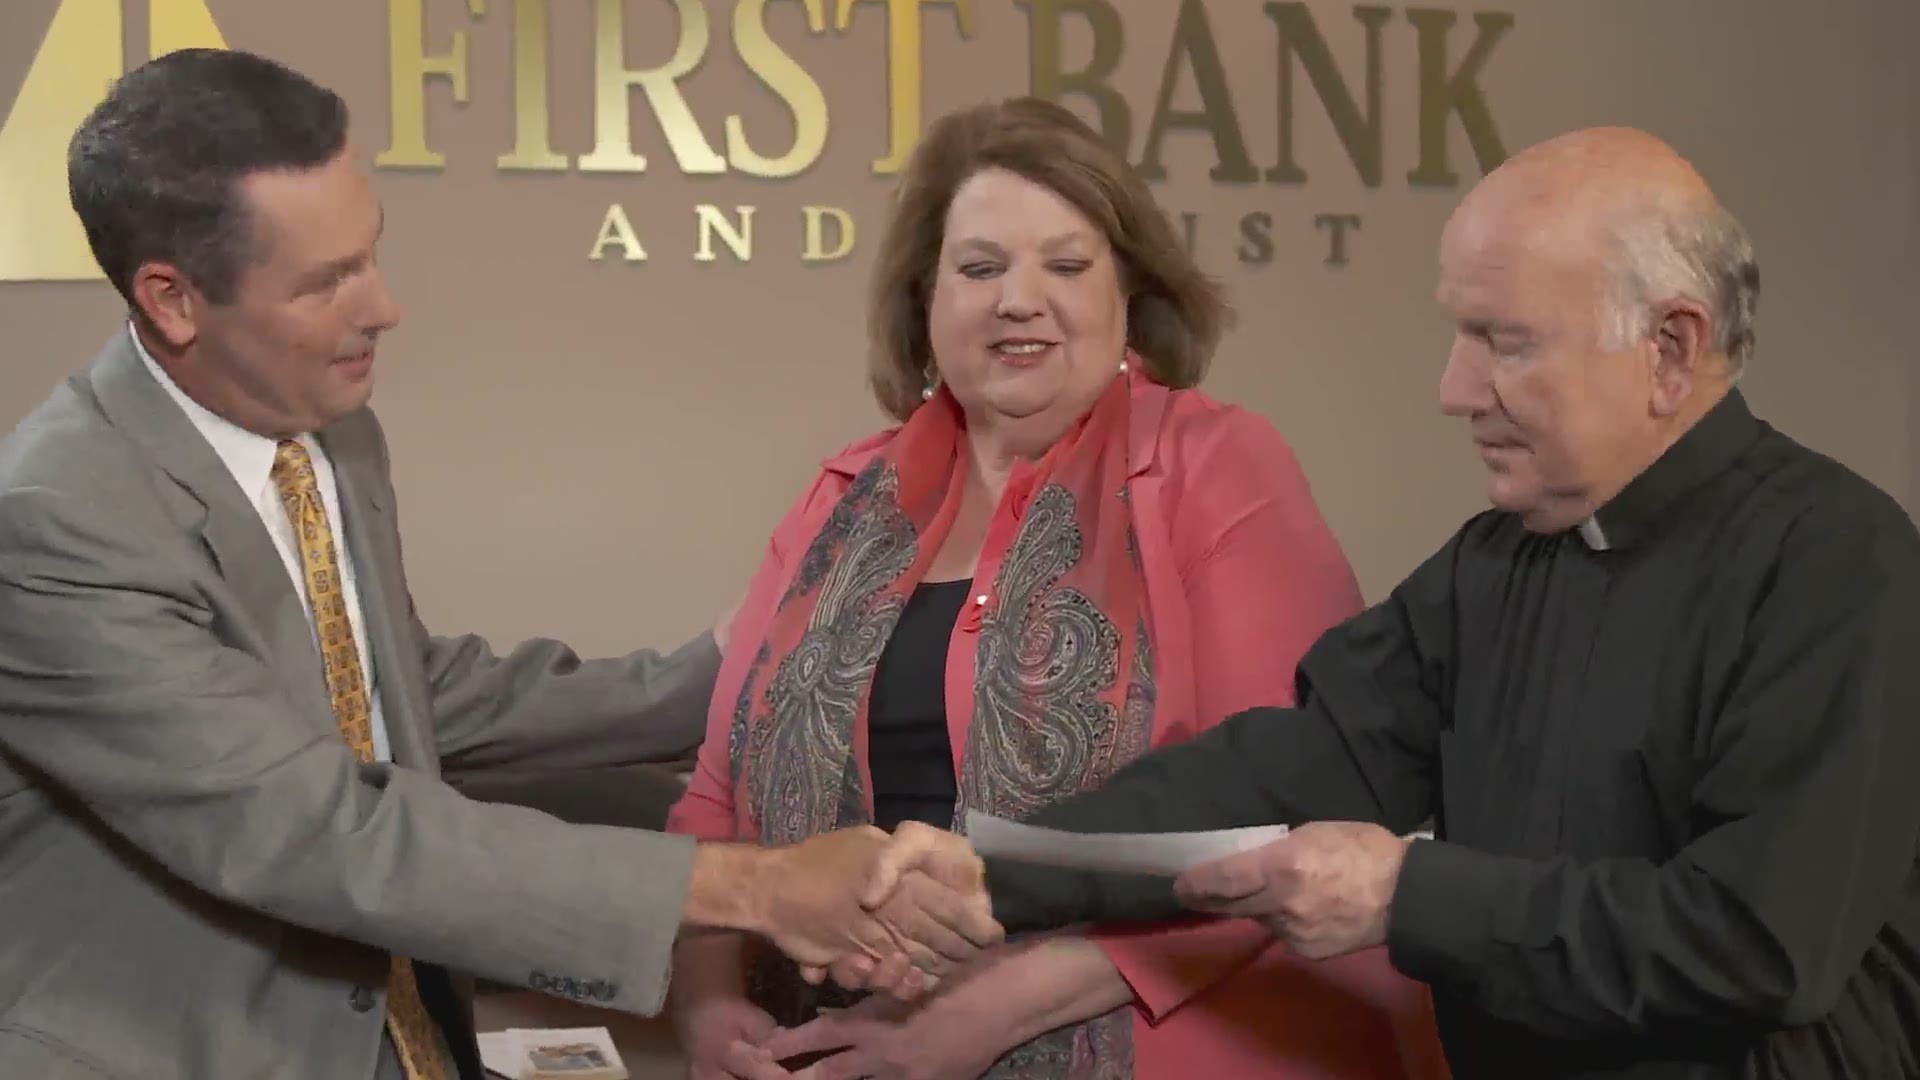 First Bank and Trust is changing lives, with a better future for our children.